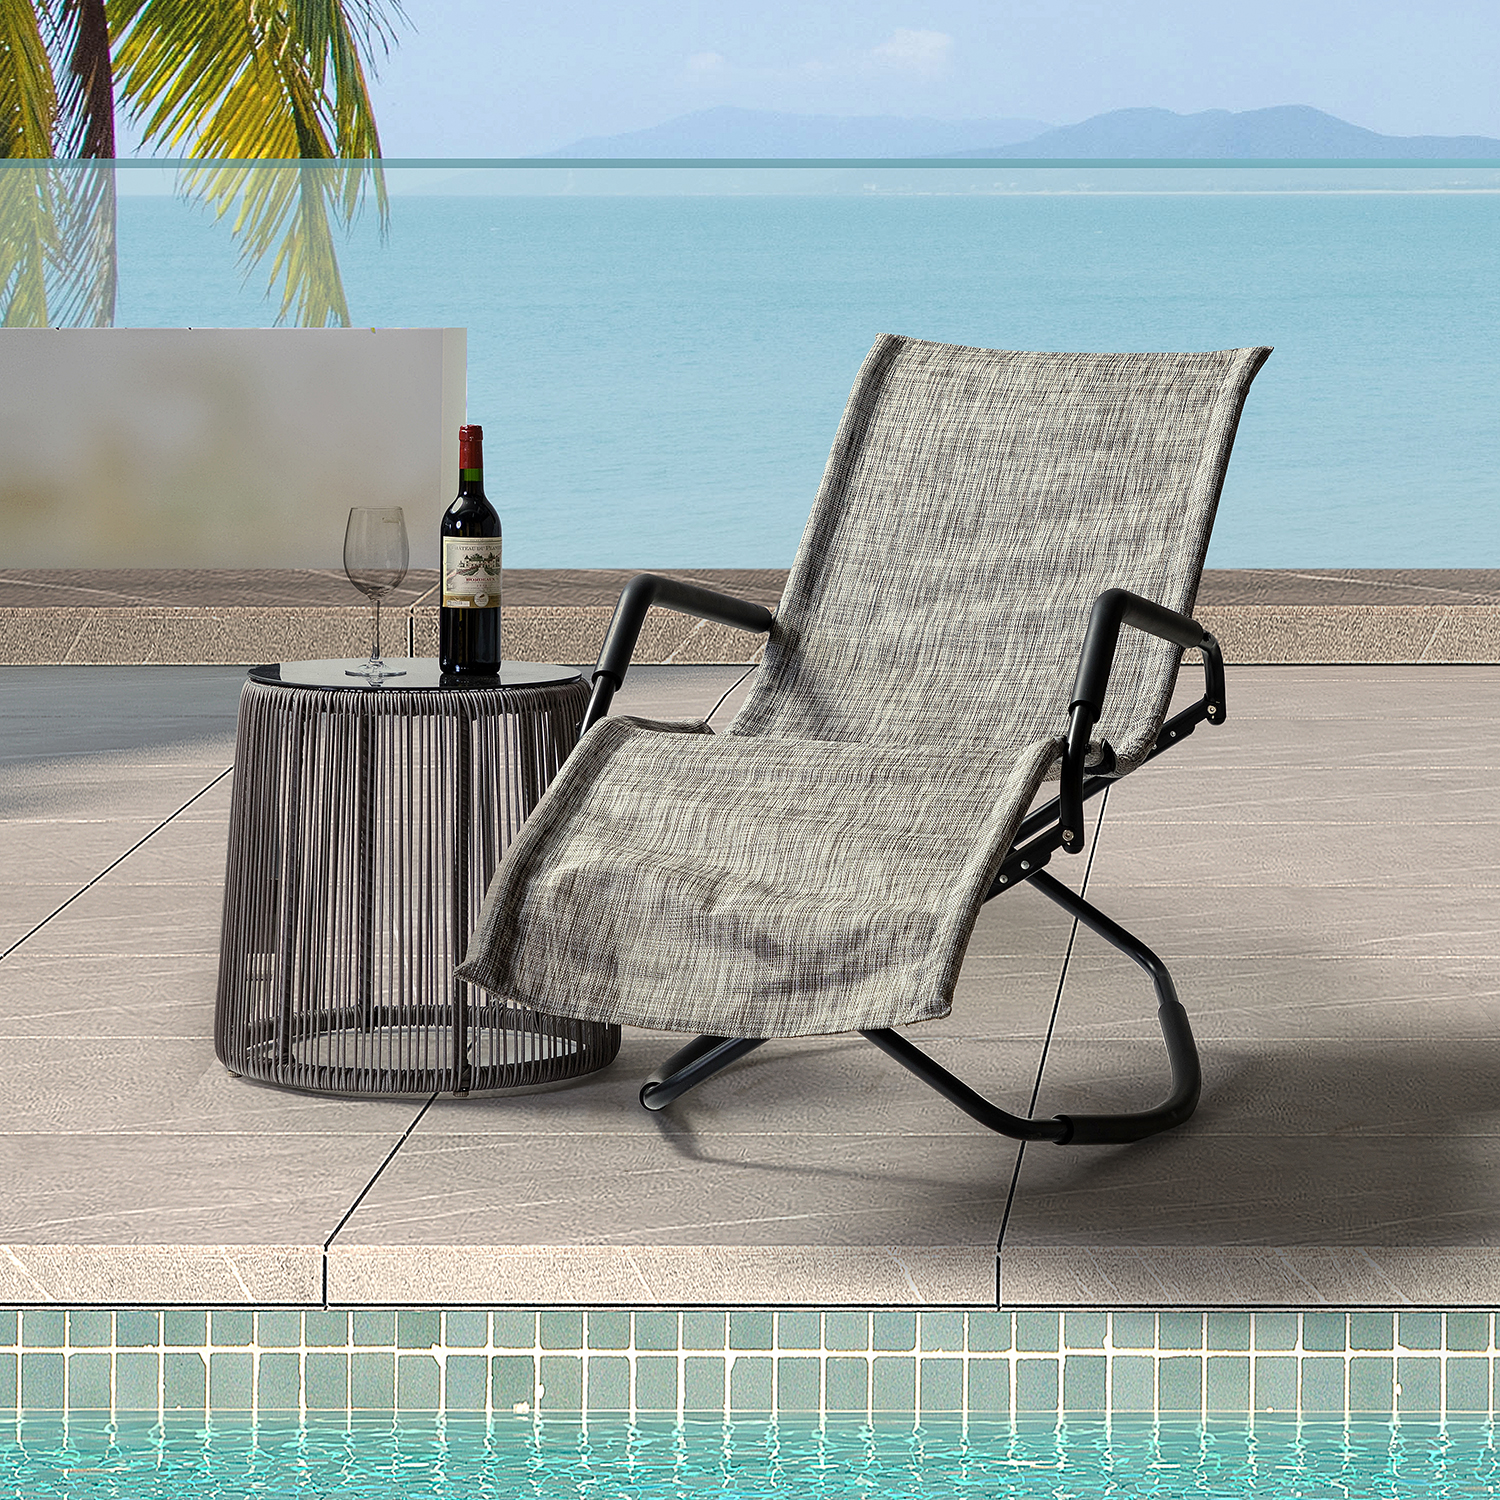 Folding Lounge Chair, Patio Rocking Chaise Chair with Armrests, Beach Lightweight Reclining Chair, Outdoor Portable Folding Chair, Lounge Chaise Chair for Camping, Pool, Lawn, Garden, D7843 - image 1 of 10